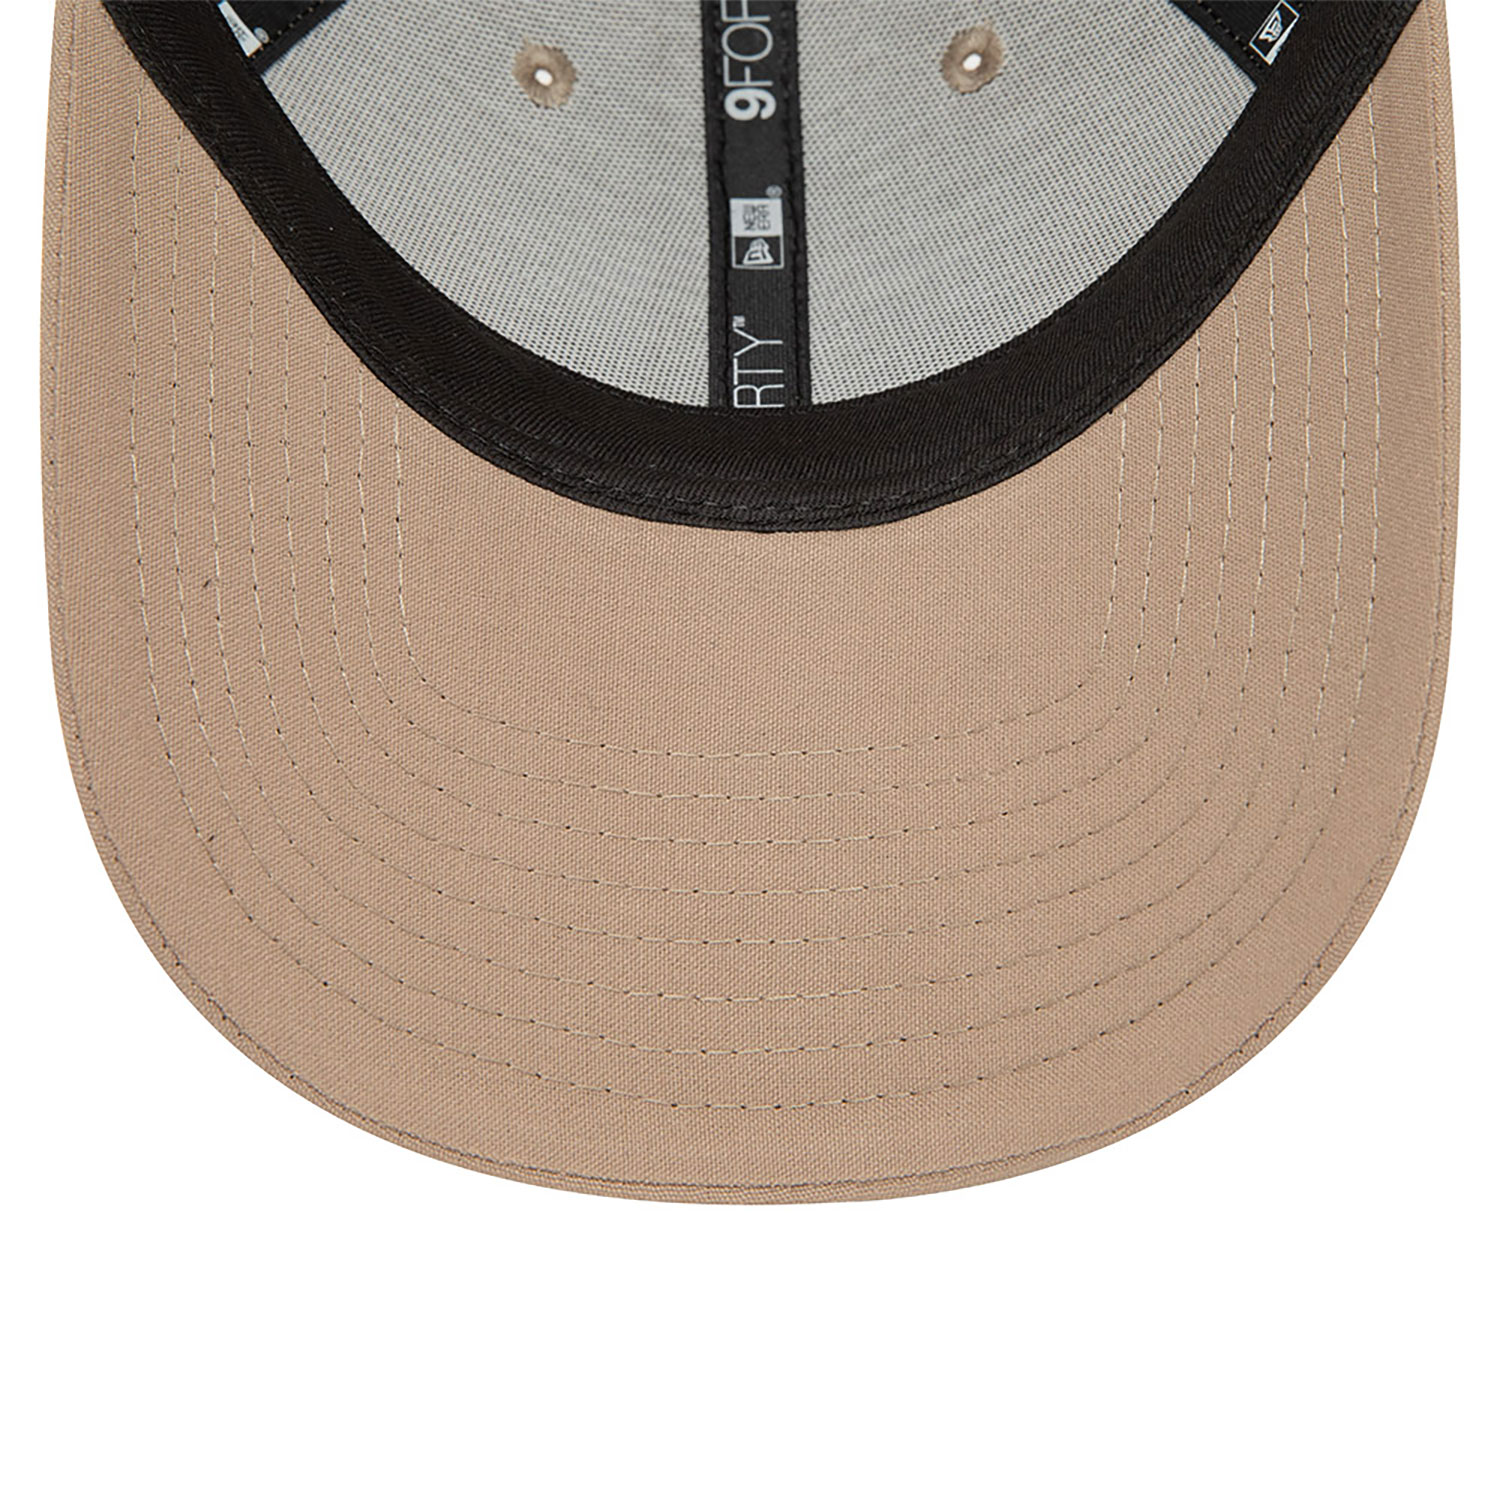 Repreve  New Era New World Brown 9FORTY Cap